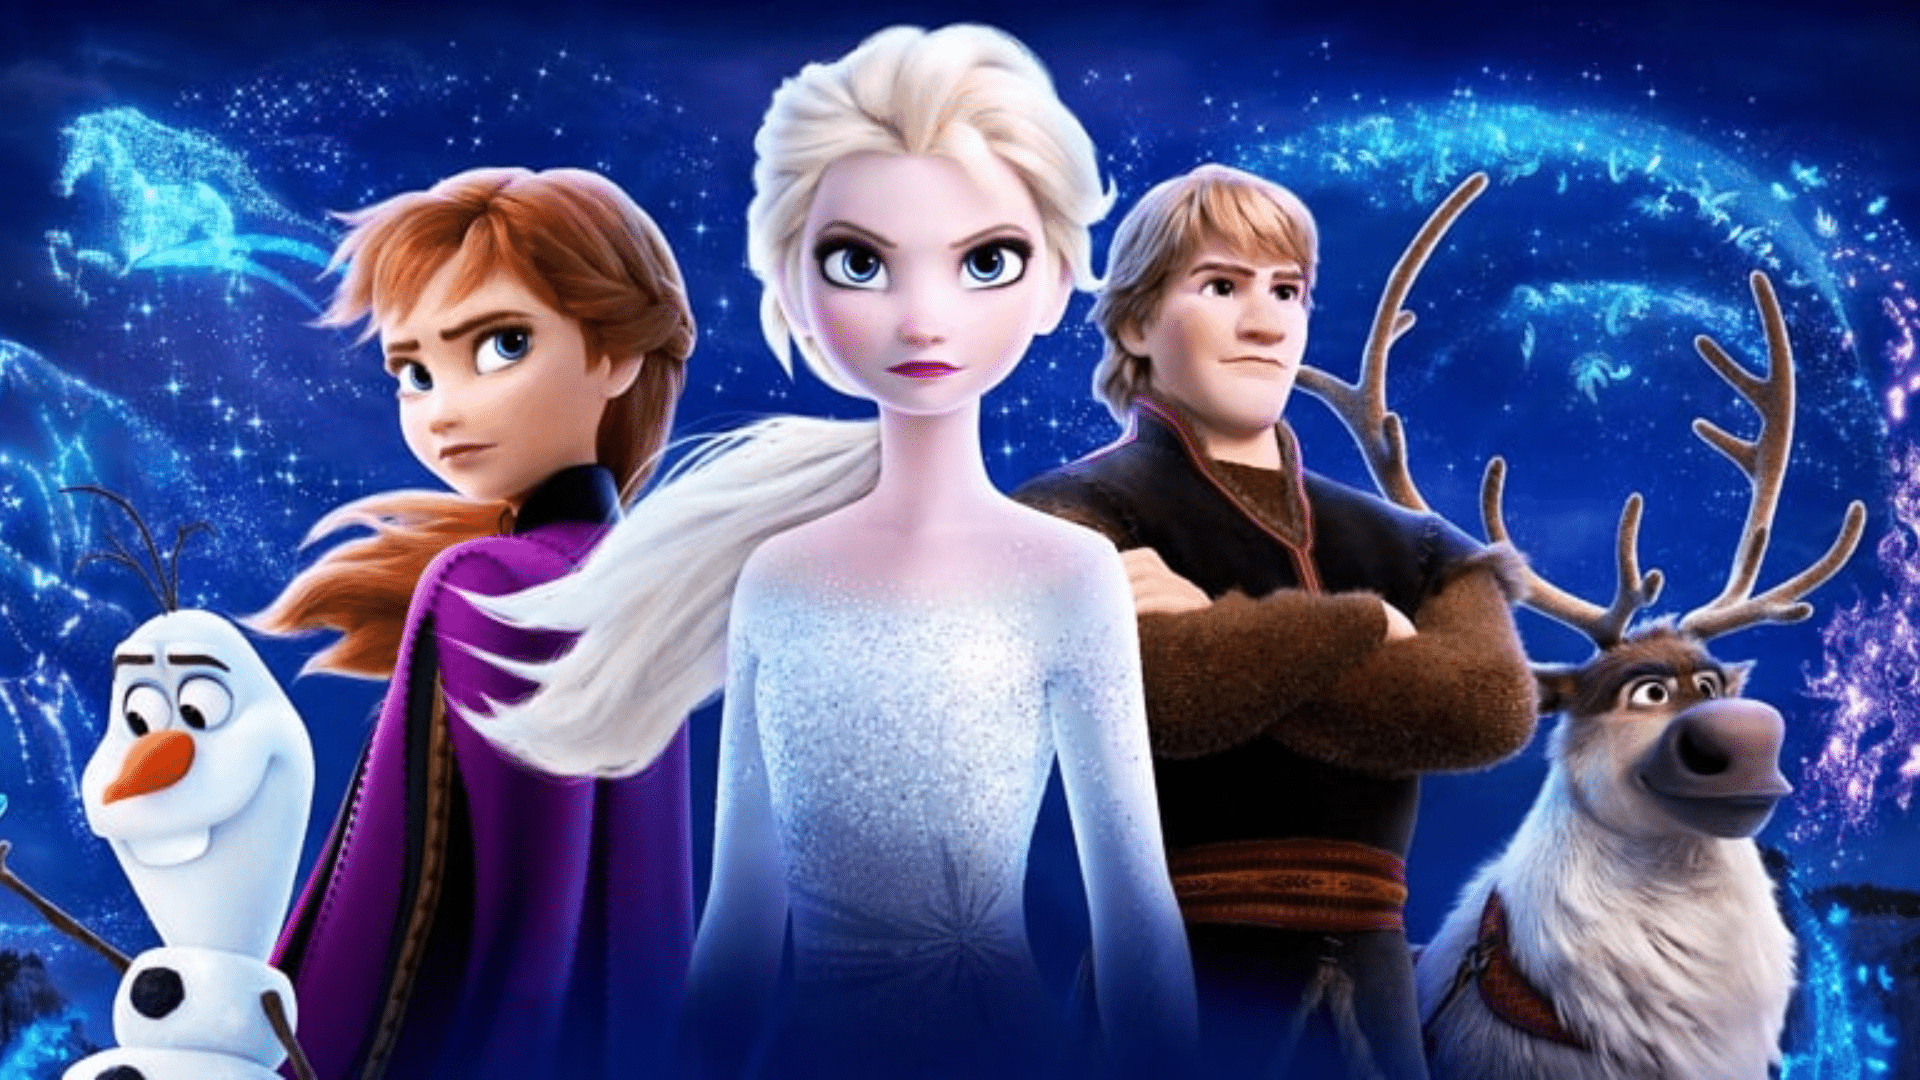 'Frozen 3' and 'Frozen 4' Both in Production, confirms Disney CEO Bob Iger